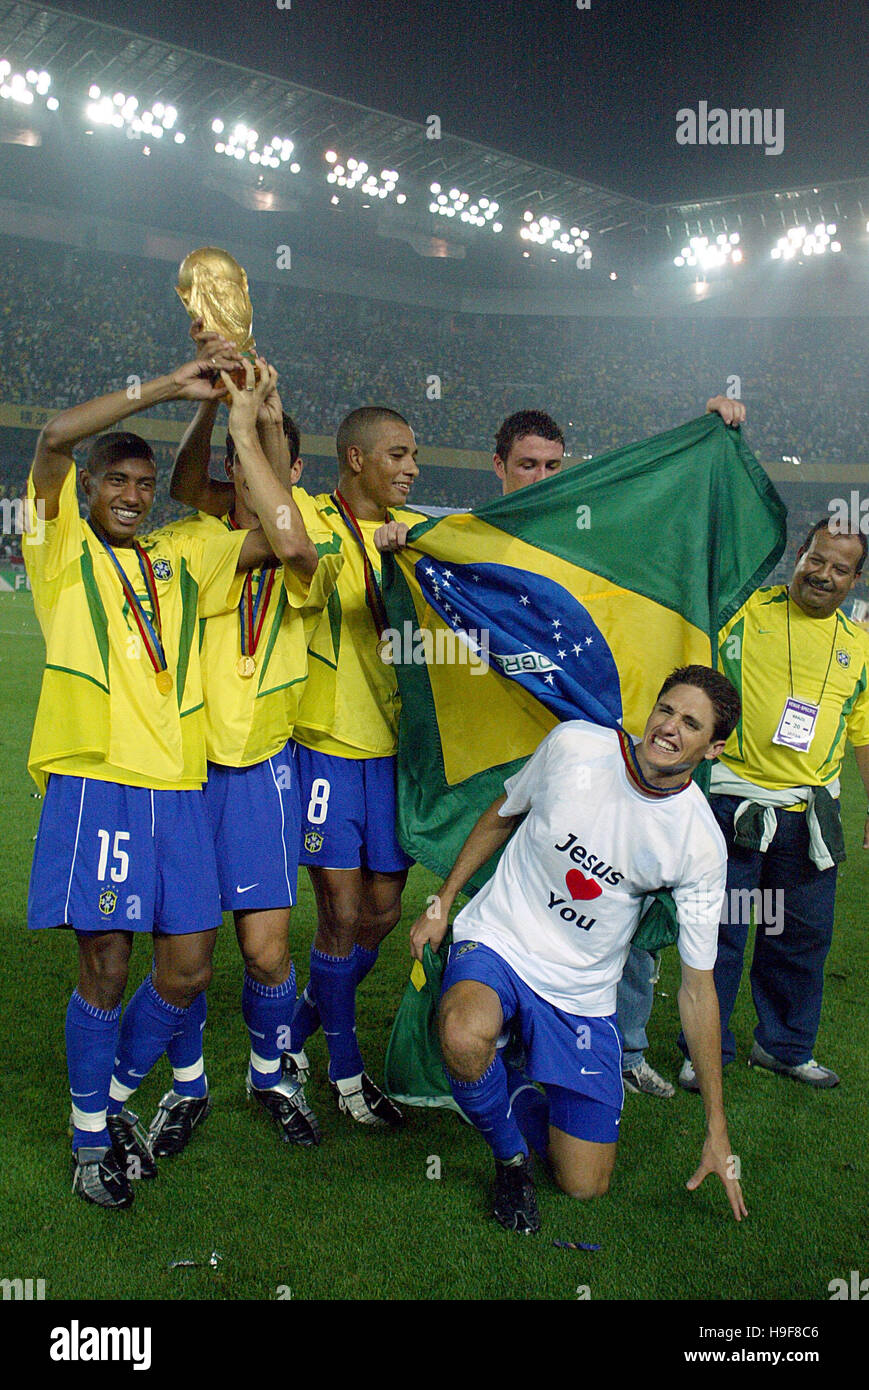 Brazil's 2002 World Cup winning team - Who were the players and